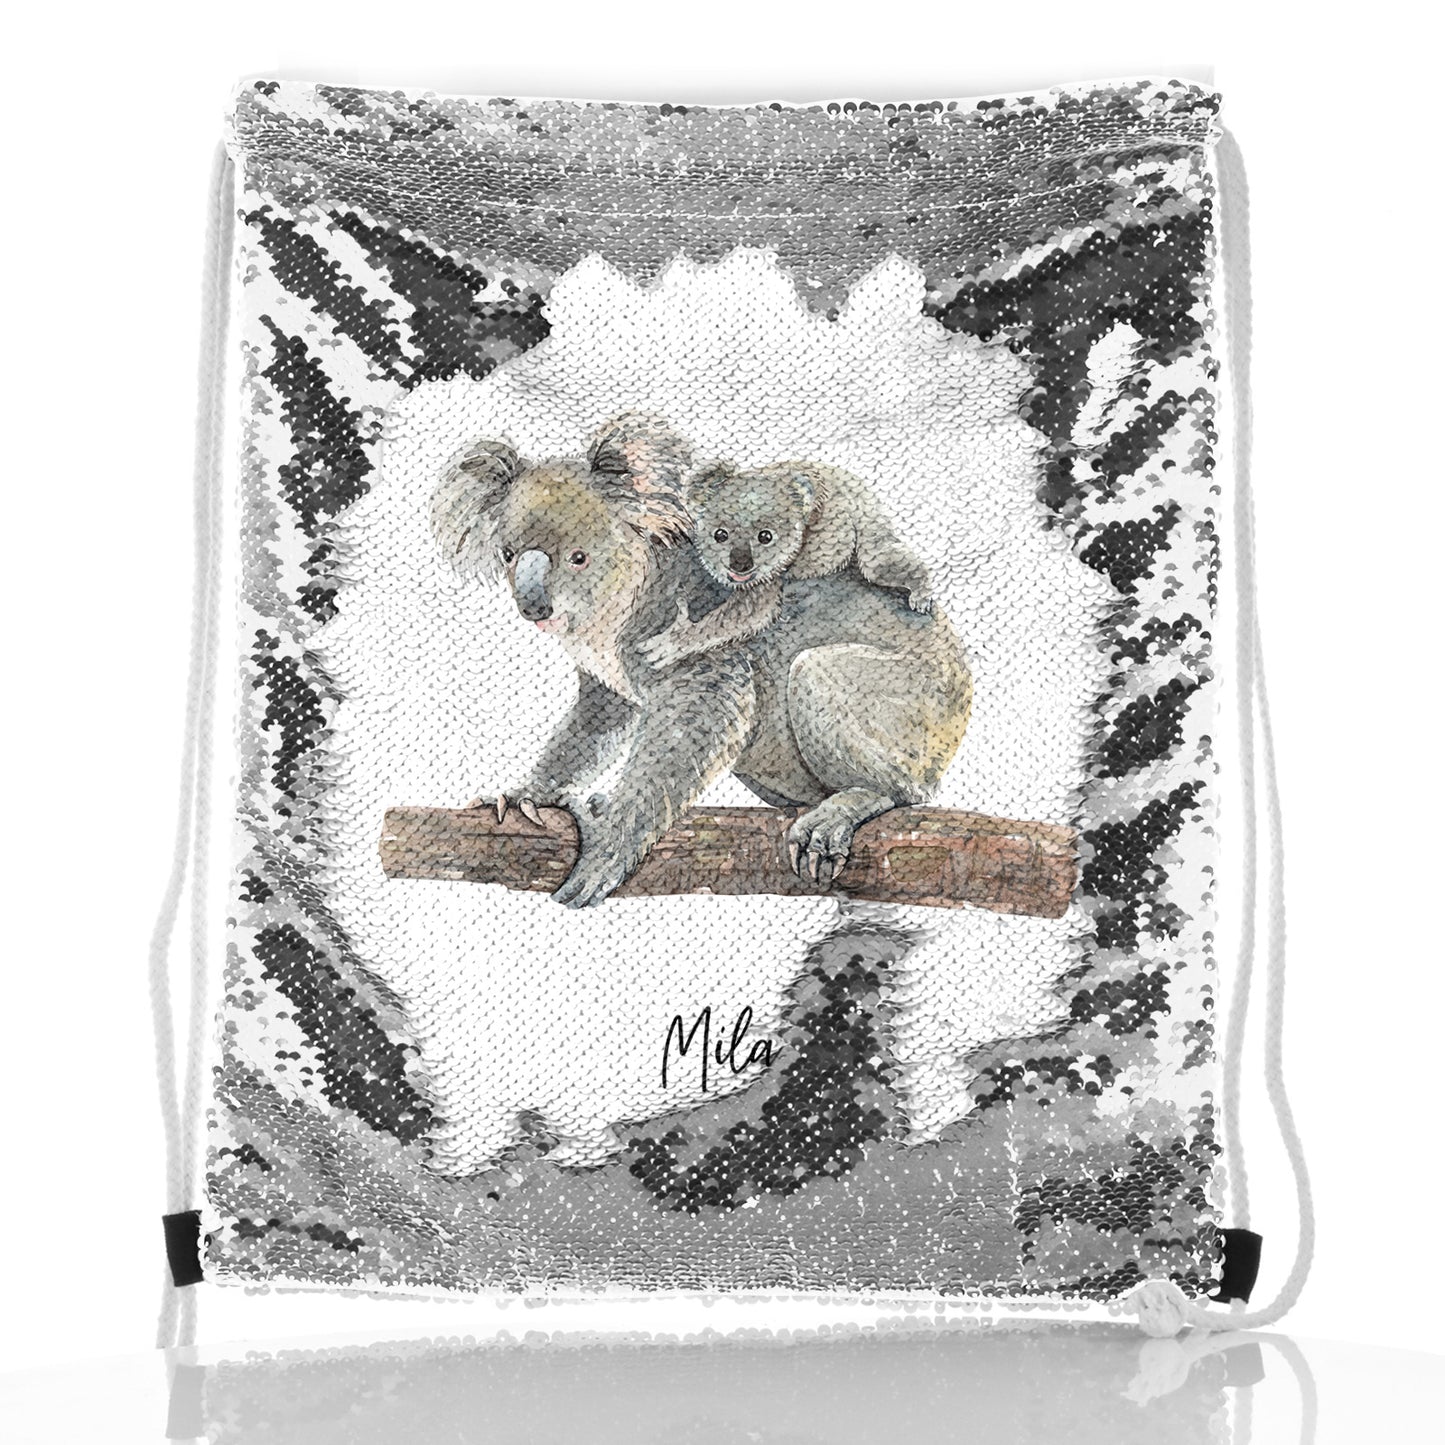 Personalised Sequin Drawstring Backpack with Welcoming Text and Embracing Mum and Baby Koalas